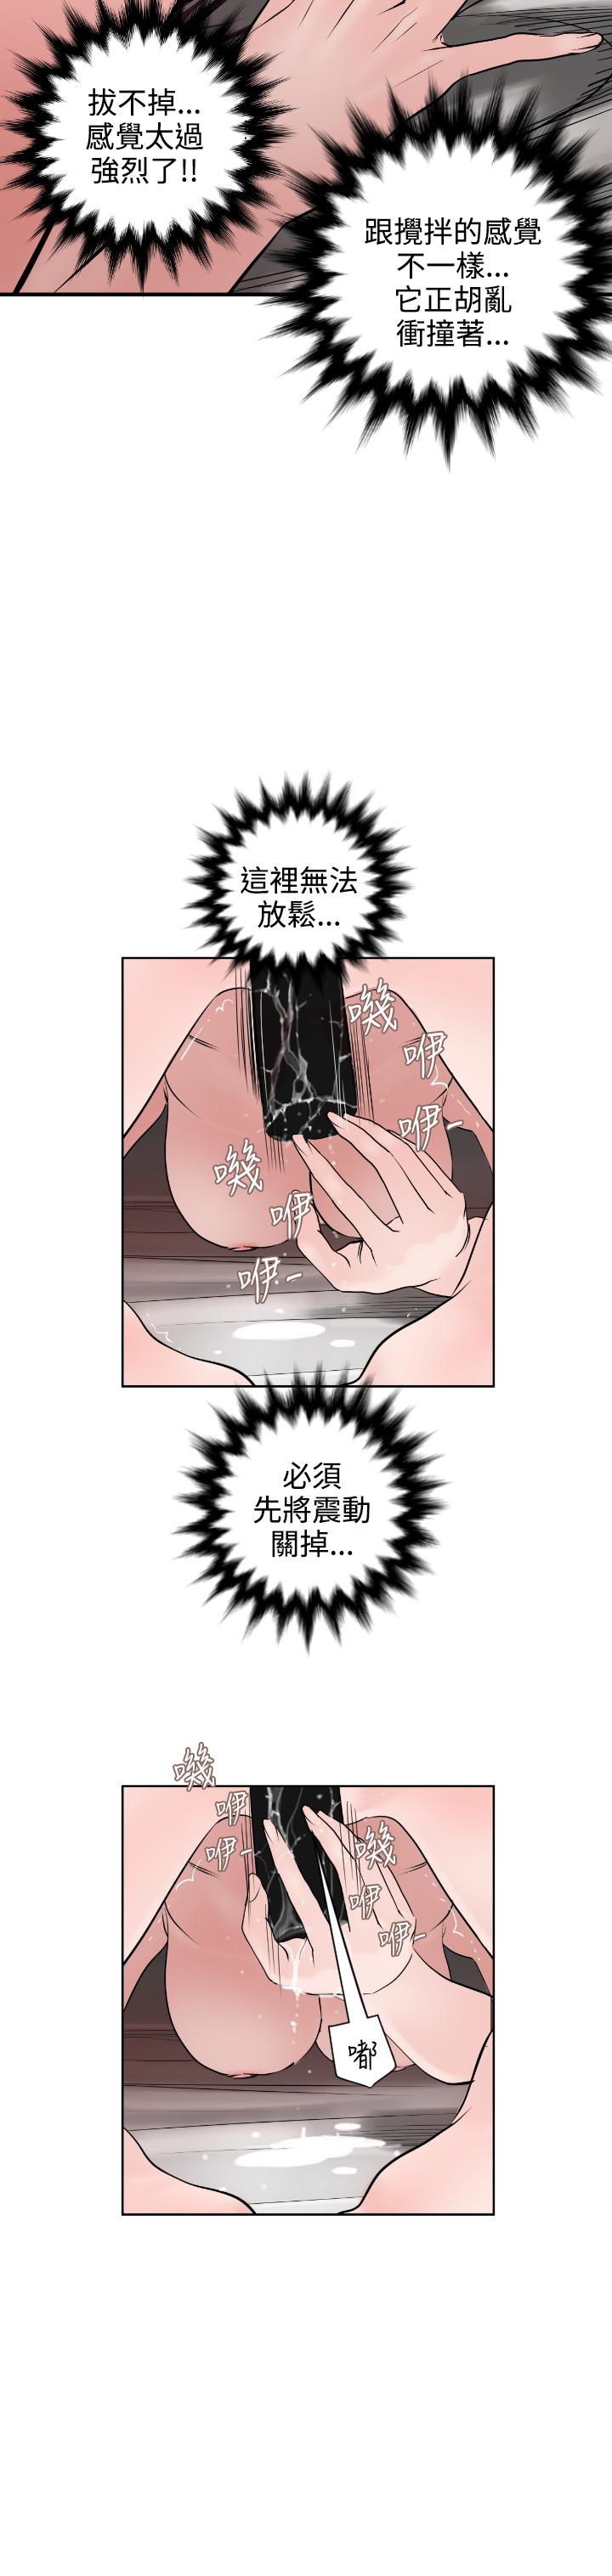 Desire King (慾求王) Ch.1-7 (chinese) 222